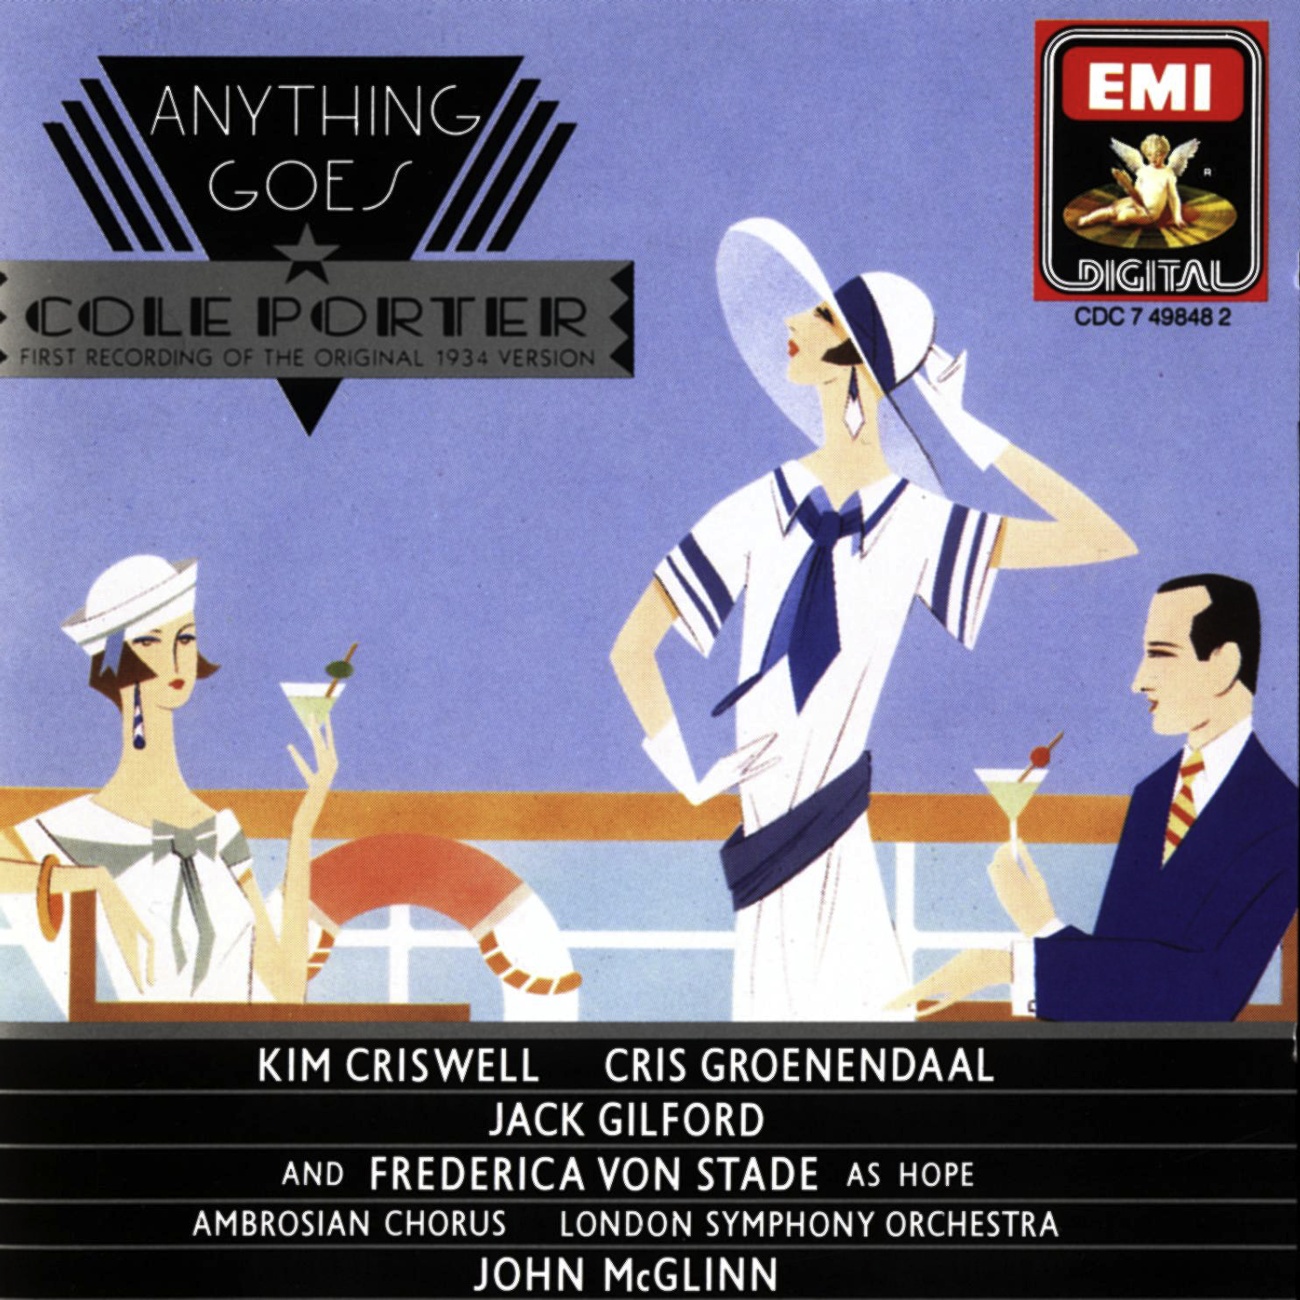 Anything Goes (original 1934 version), Act II: What a joy to be young (Hope)